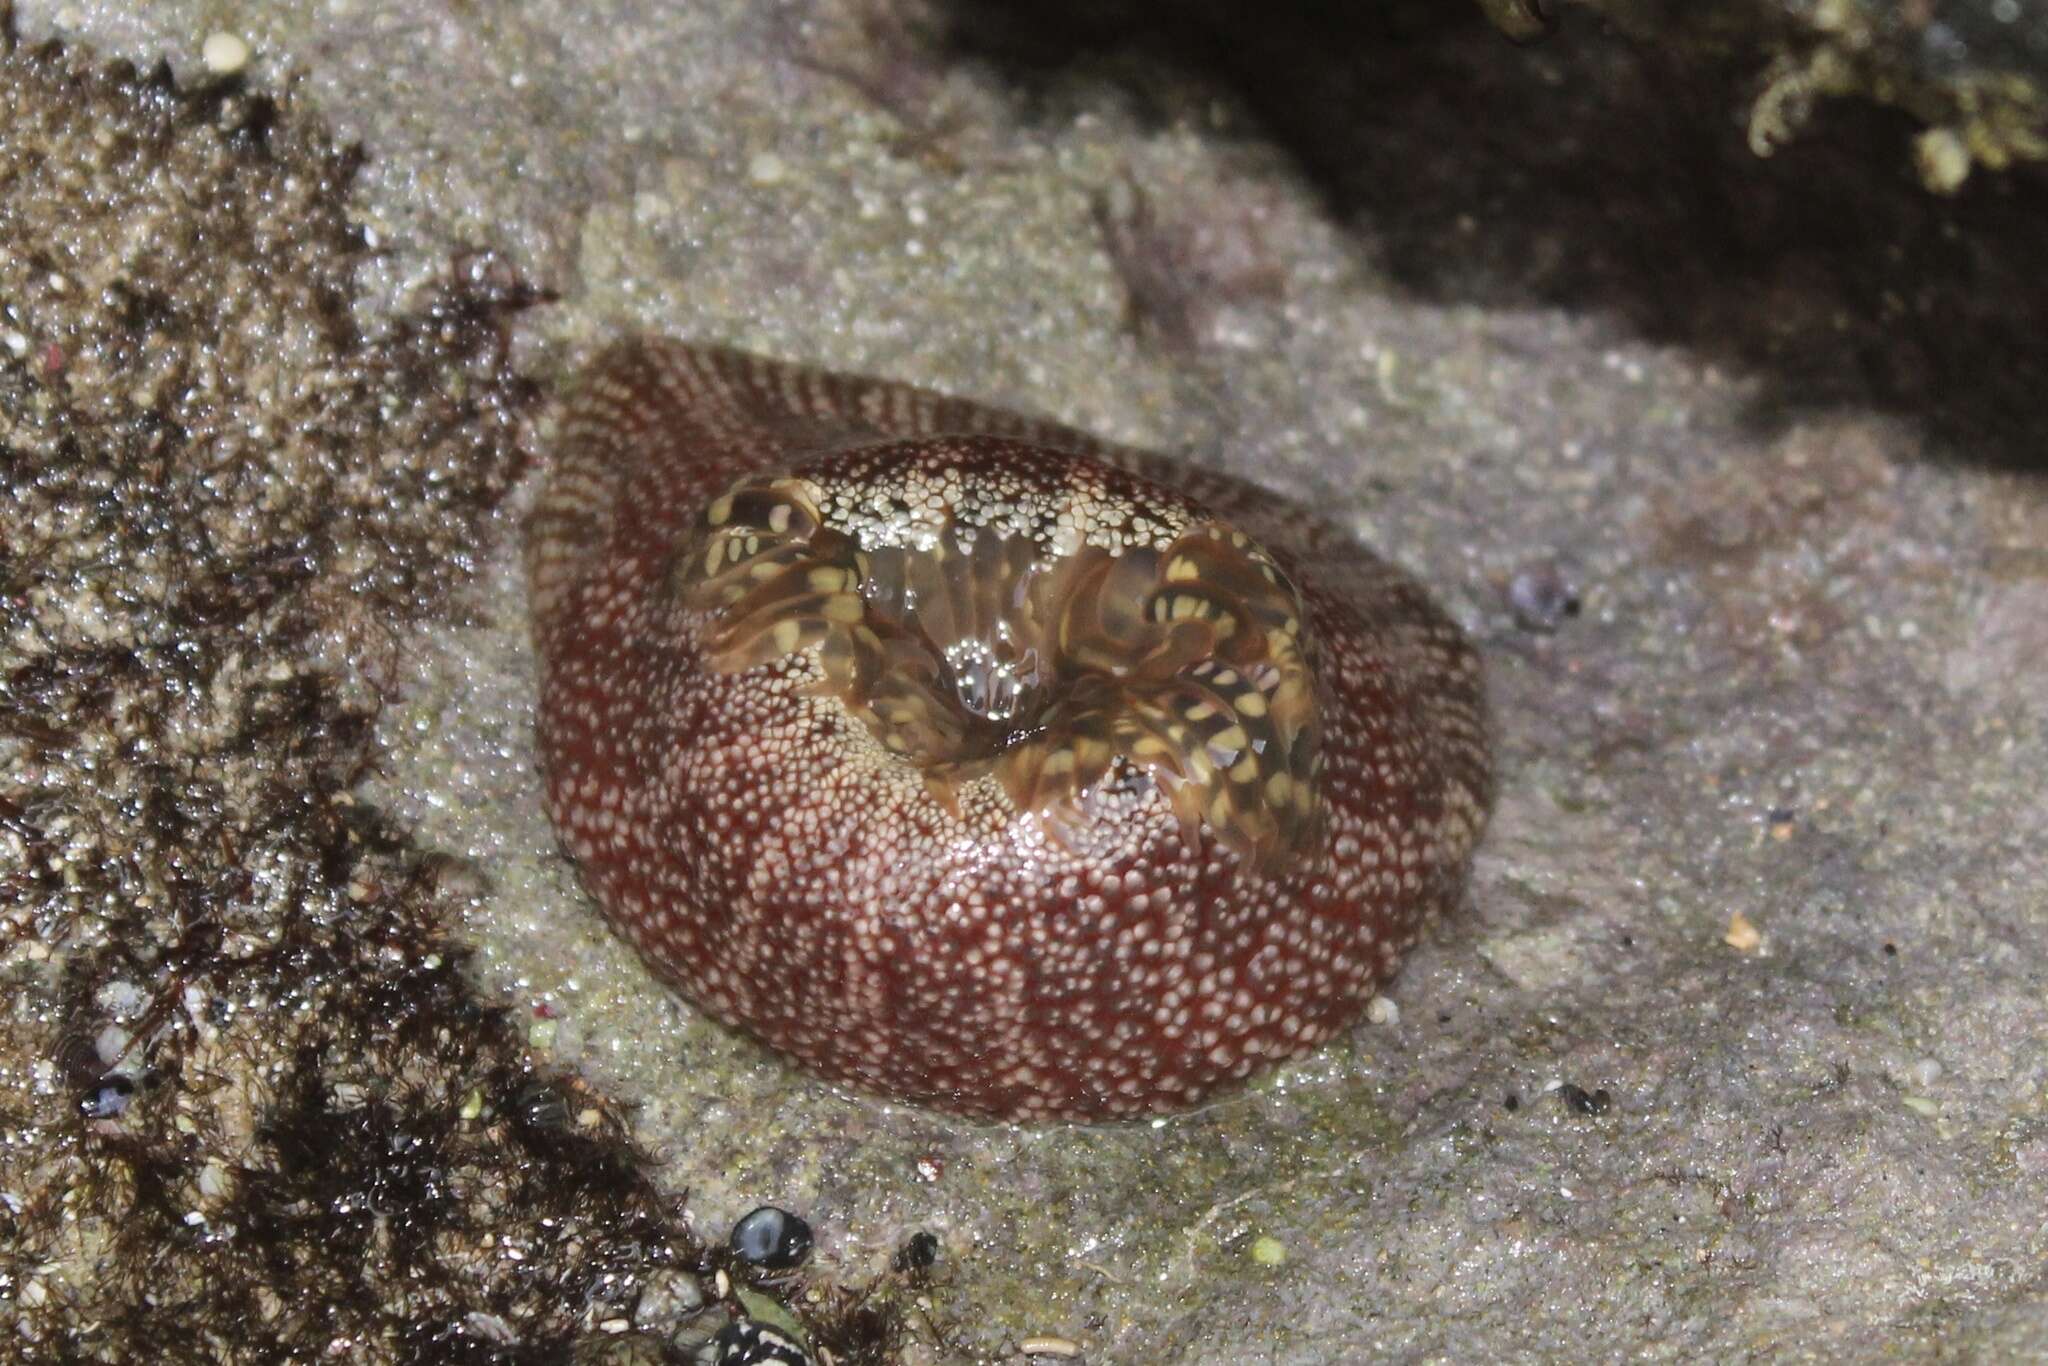 Image of red warty anemone